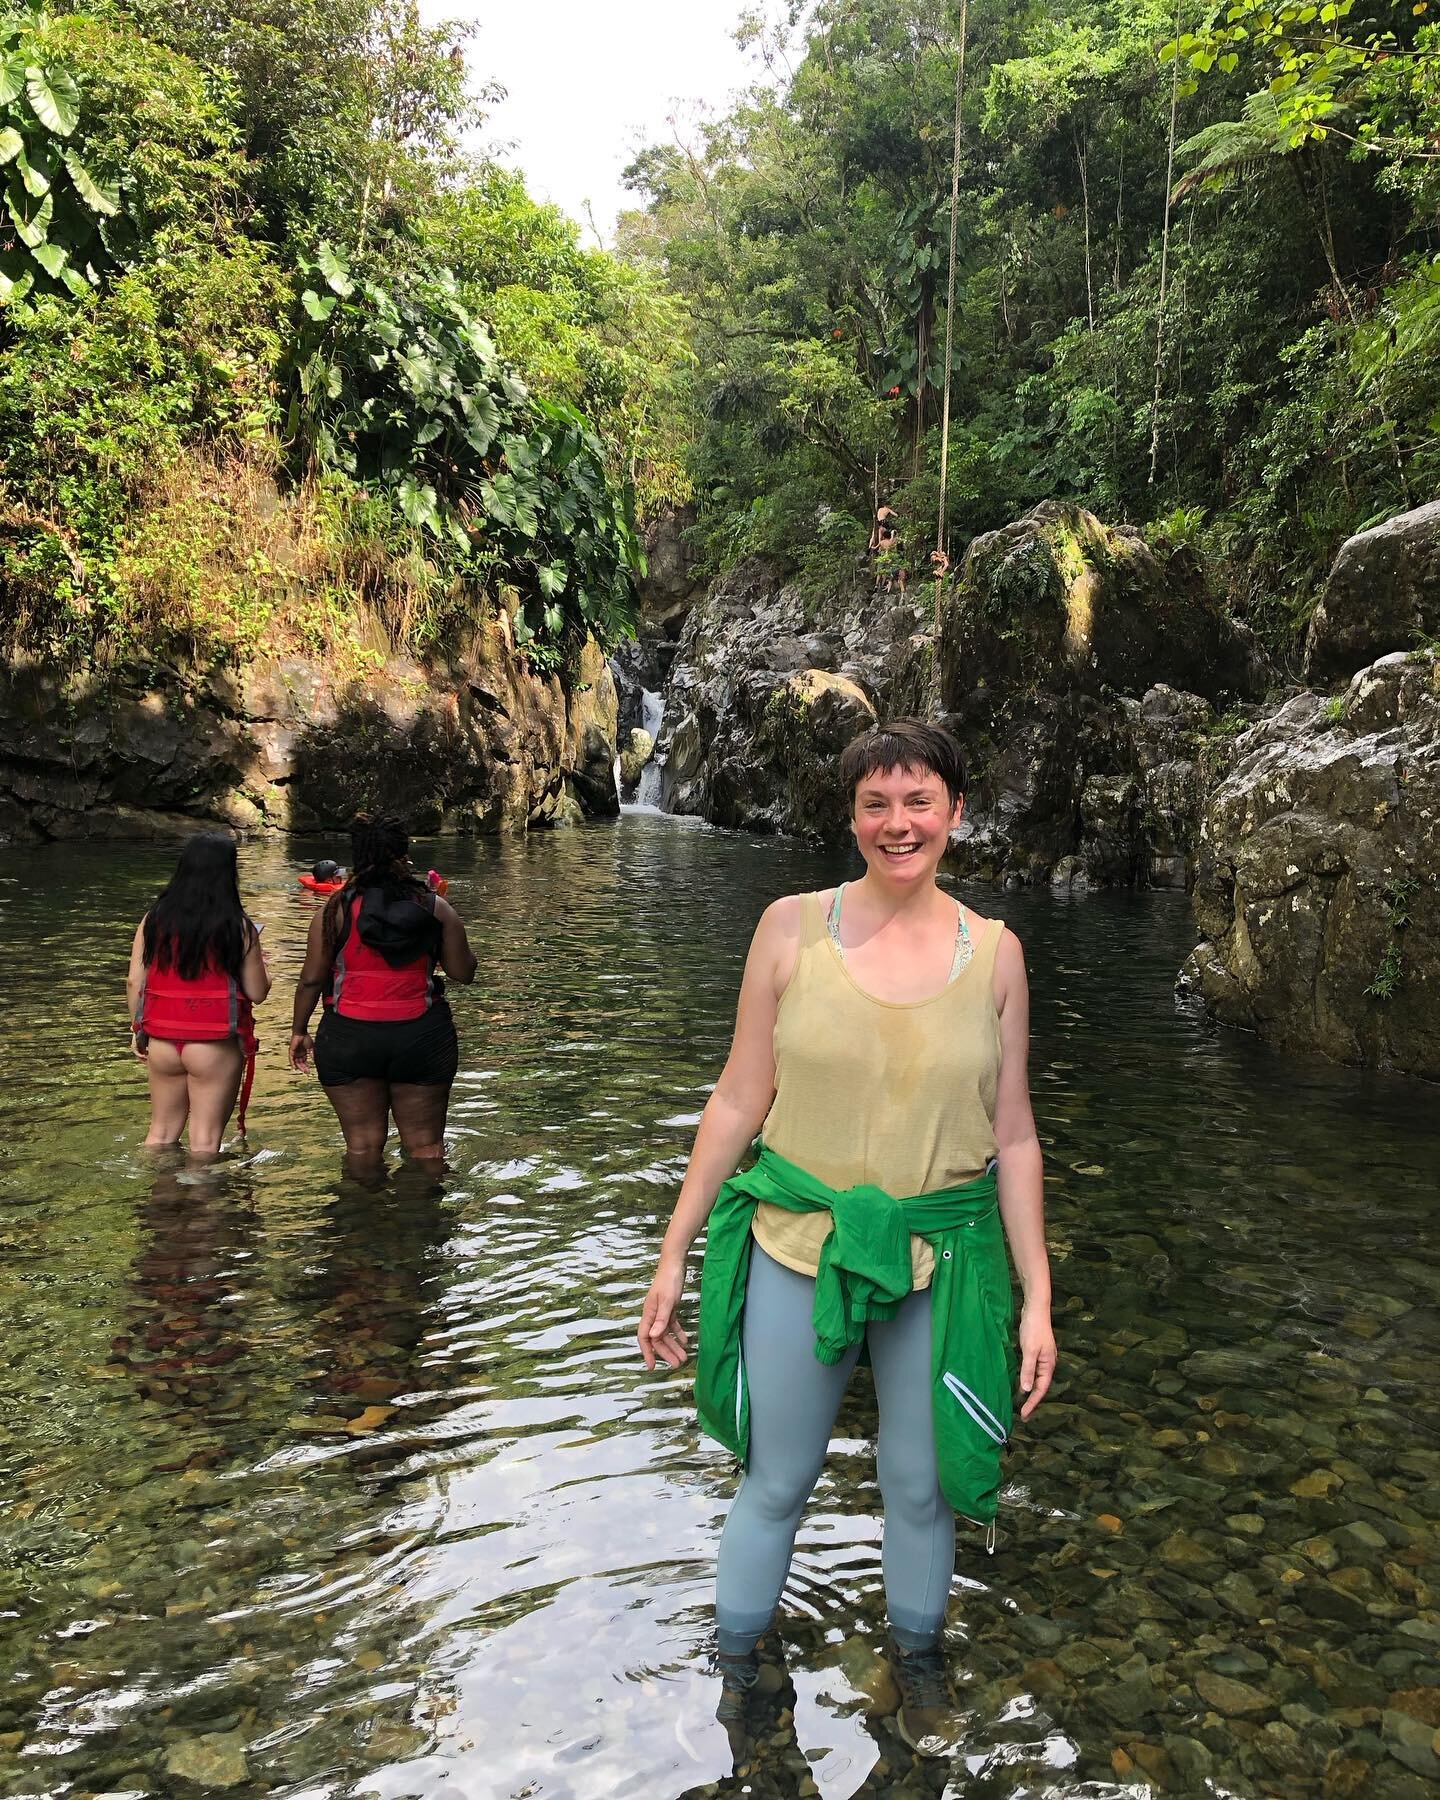 Charco Fr&iacute;o: a day in the rainforest spent hiking, swimming, cliff jumping, rock sliding, rope swinging, and plant id'ing 🌿